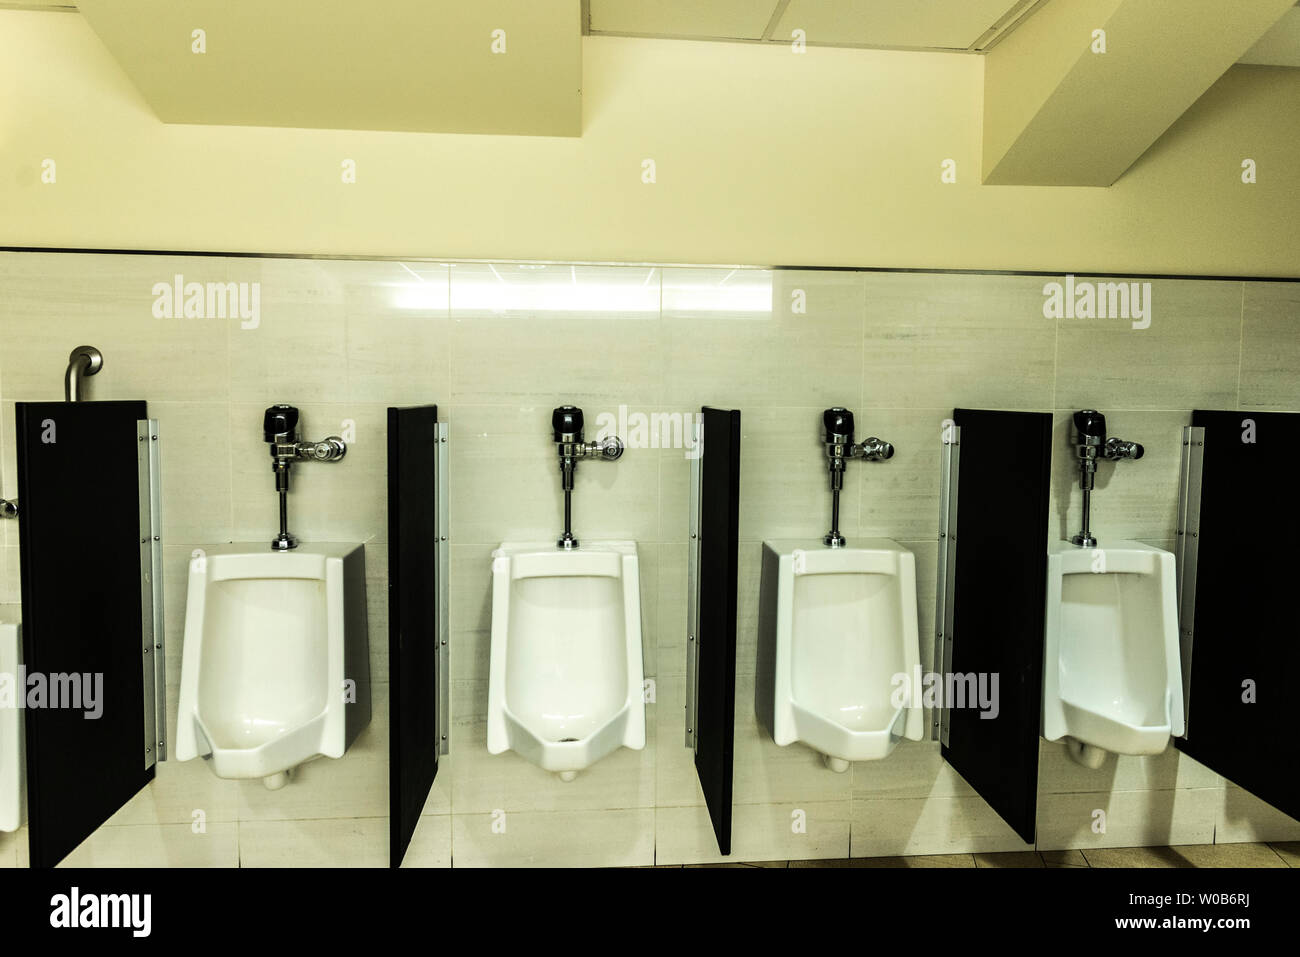 Four WC or urinal for men inside a building in New York City, USA Stock Photo